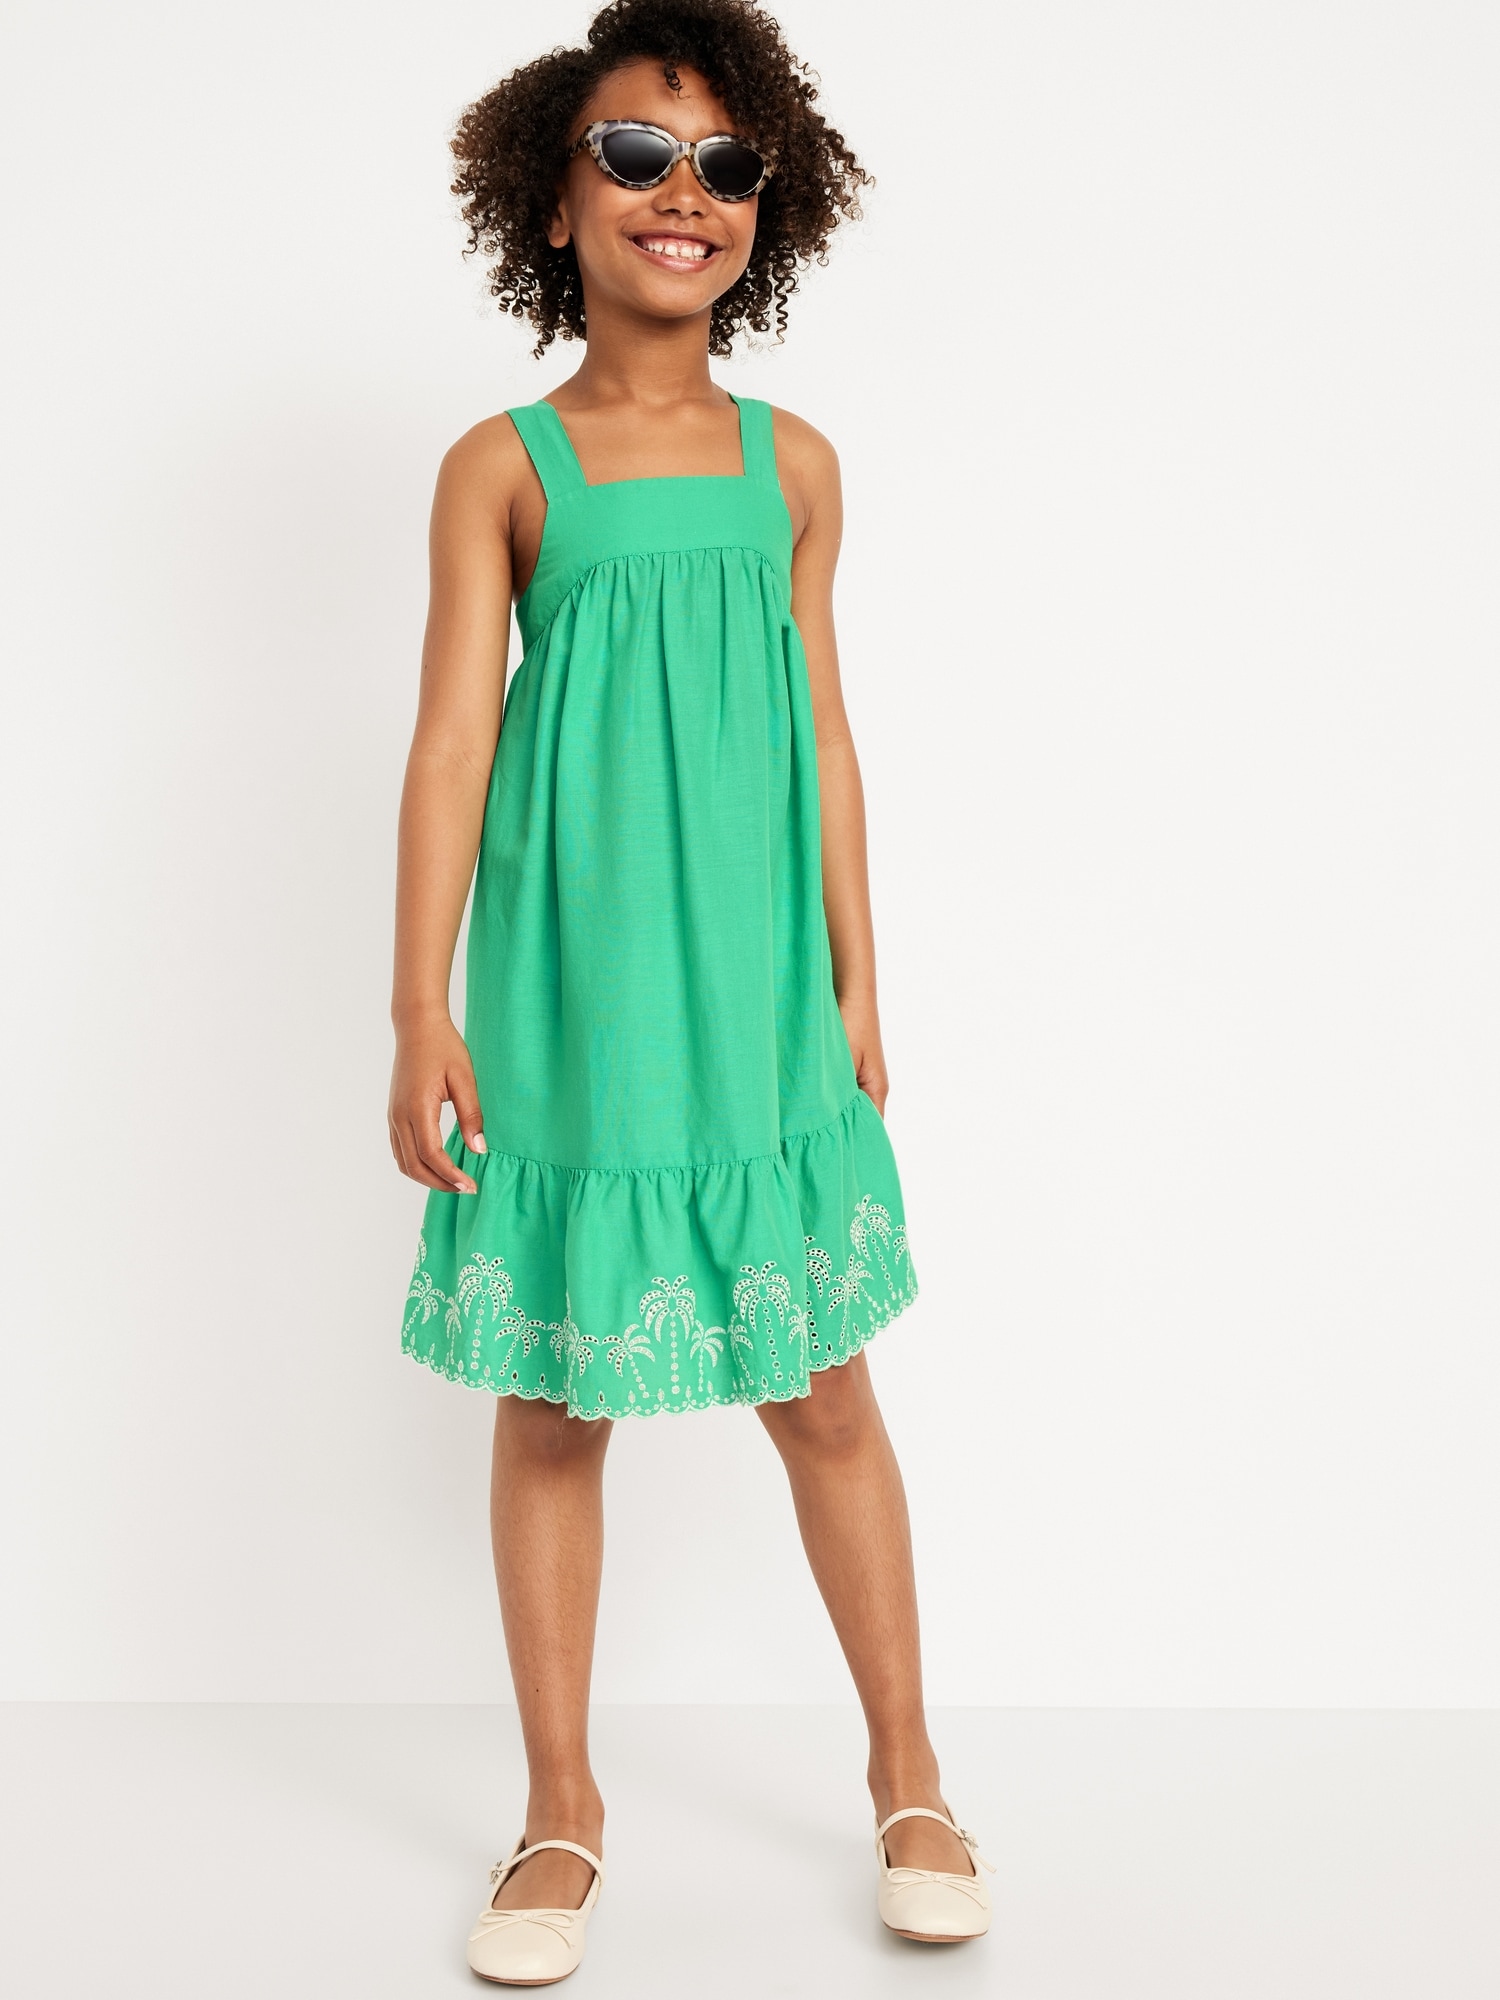 leeveless Embroidered Dress for Girls